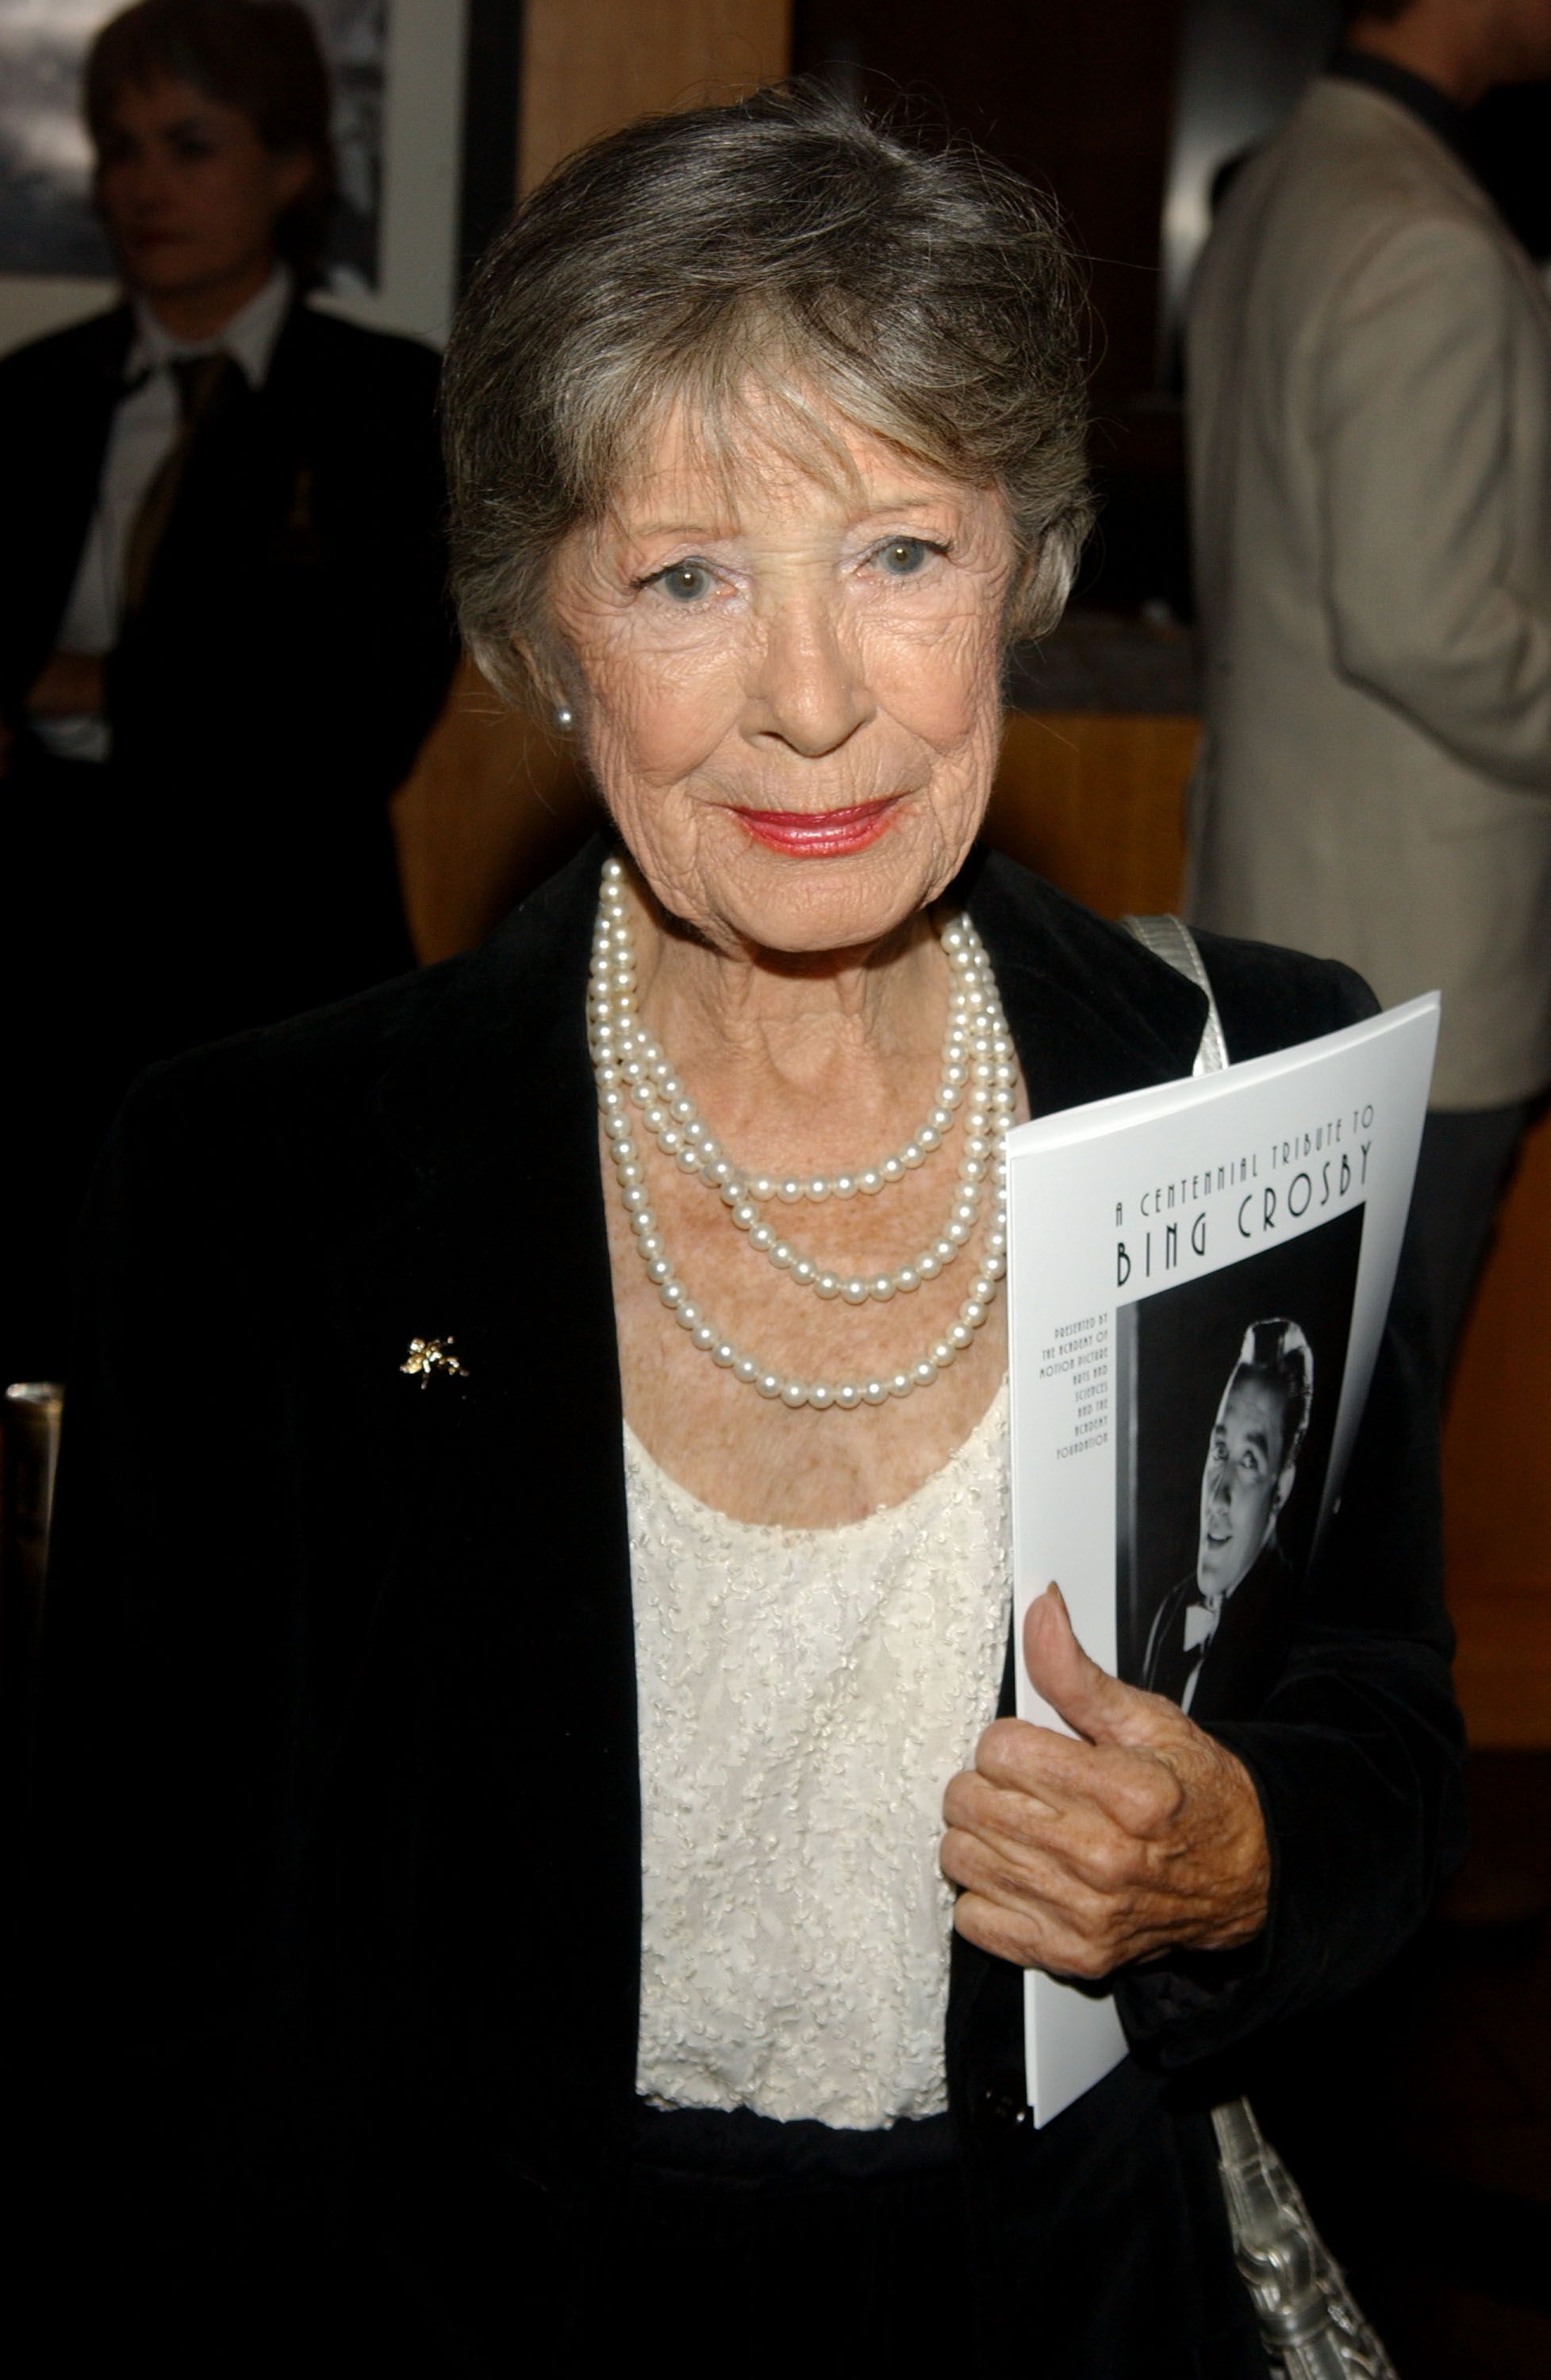 Edith Fellows at the Academy of Motion Picture Arts and Sciences' Centennial Tribute to Bing Crosby on November 21, 2003 | Photo: Getty Images